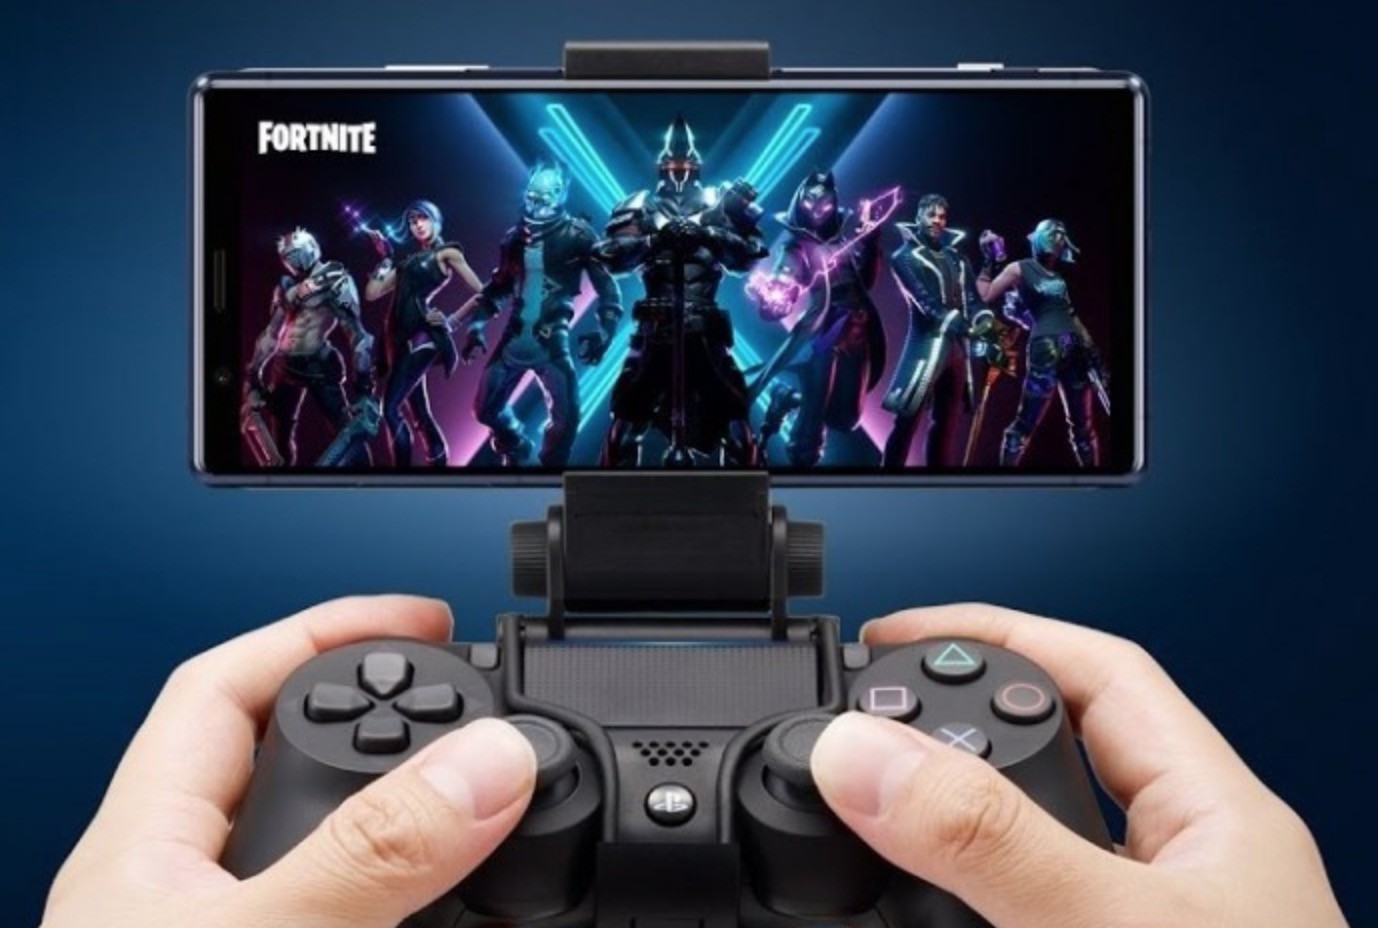 Ps4 игры андроид. Xperia Sony ps4. Sony ps5 Remote. Ps5 Remote Play Android TV. Ремоут плей пс5.